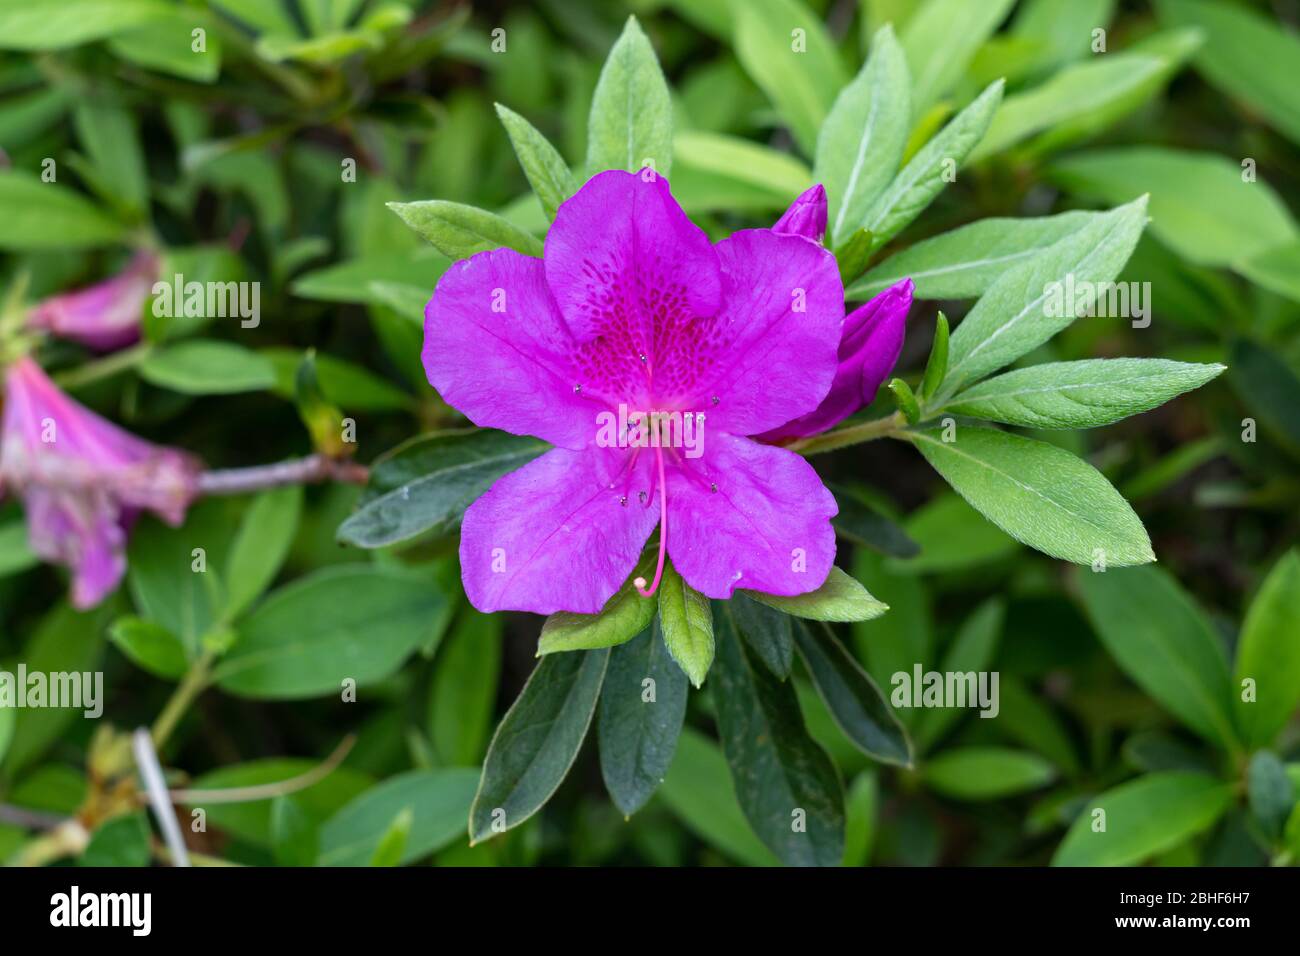 Rhododendron ponticum, called common rhododendron or pontic rhododendron, is a species of Rhododendron native to southern Europe and southwest Asia. B Stock Photo